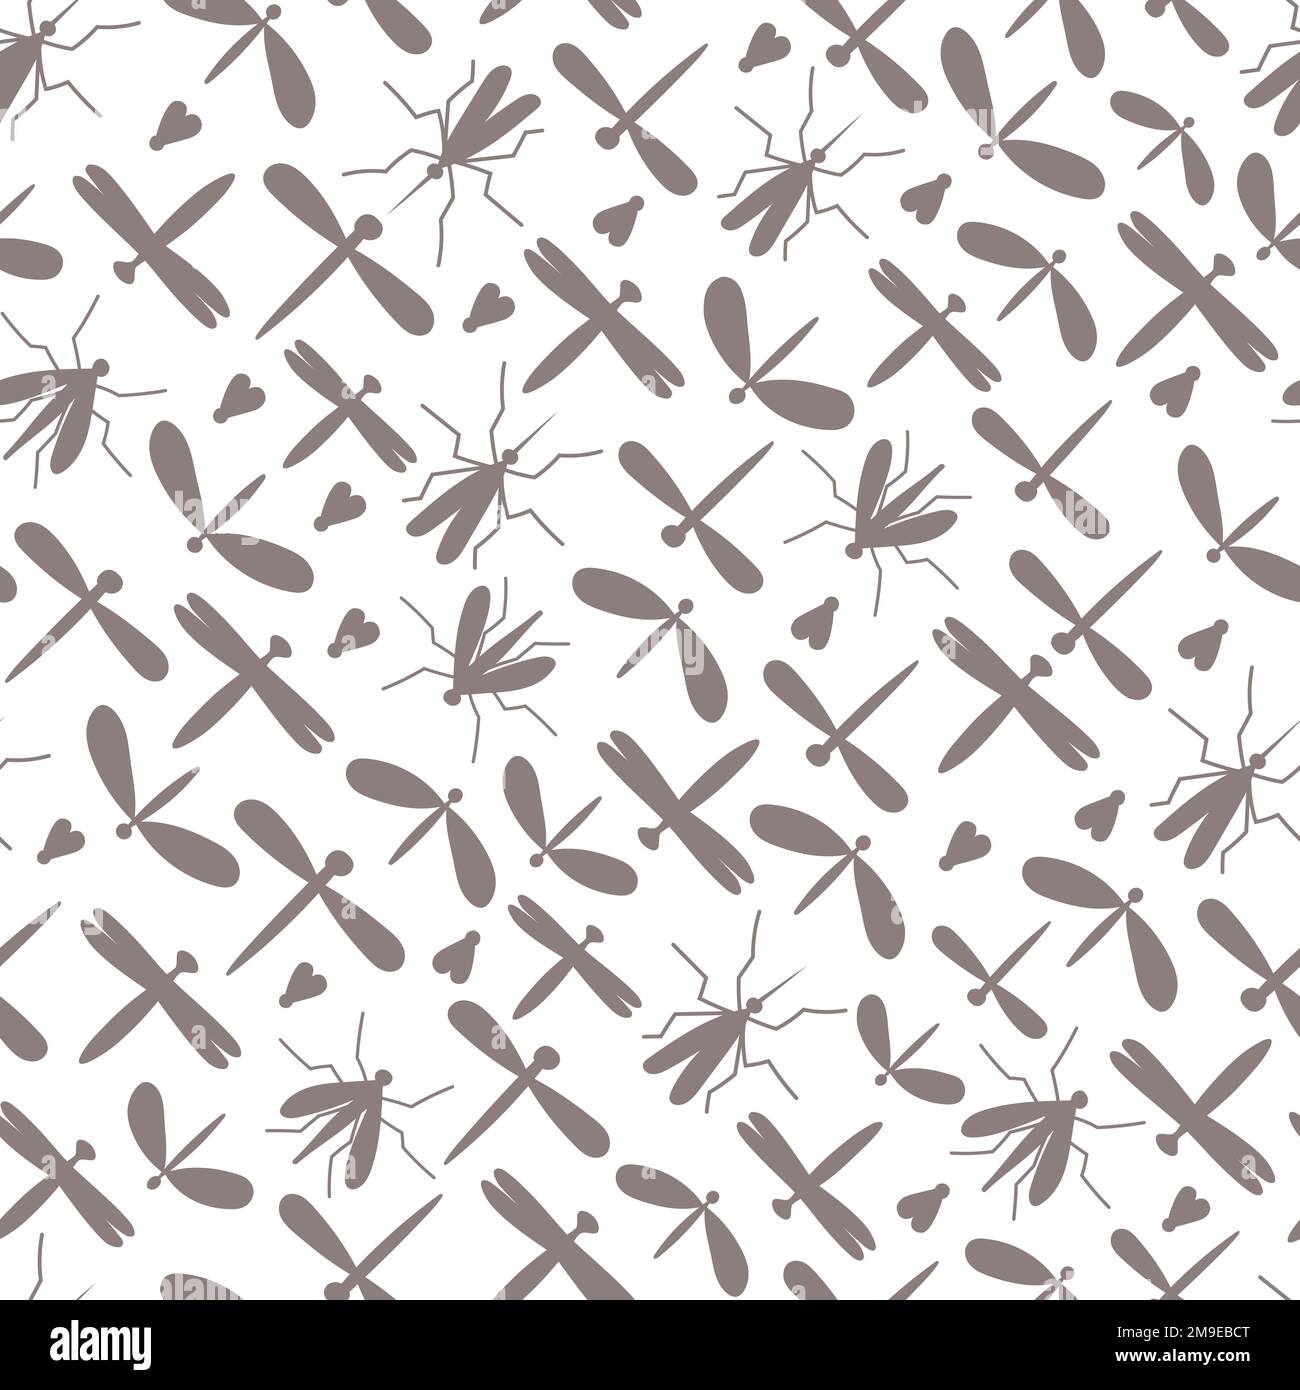 Vector seamless pattern with insects, bugs, hexapods shapes. Wild little forest animals. Stock Vector